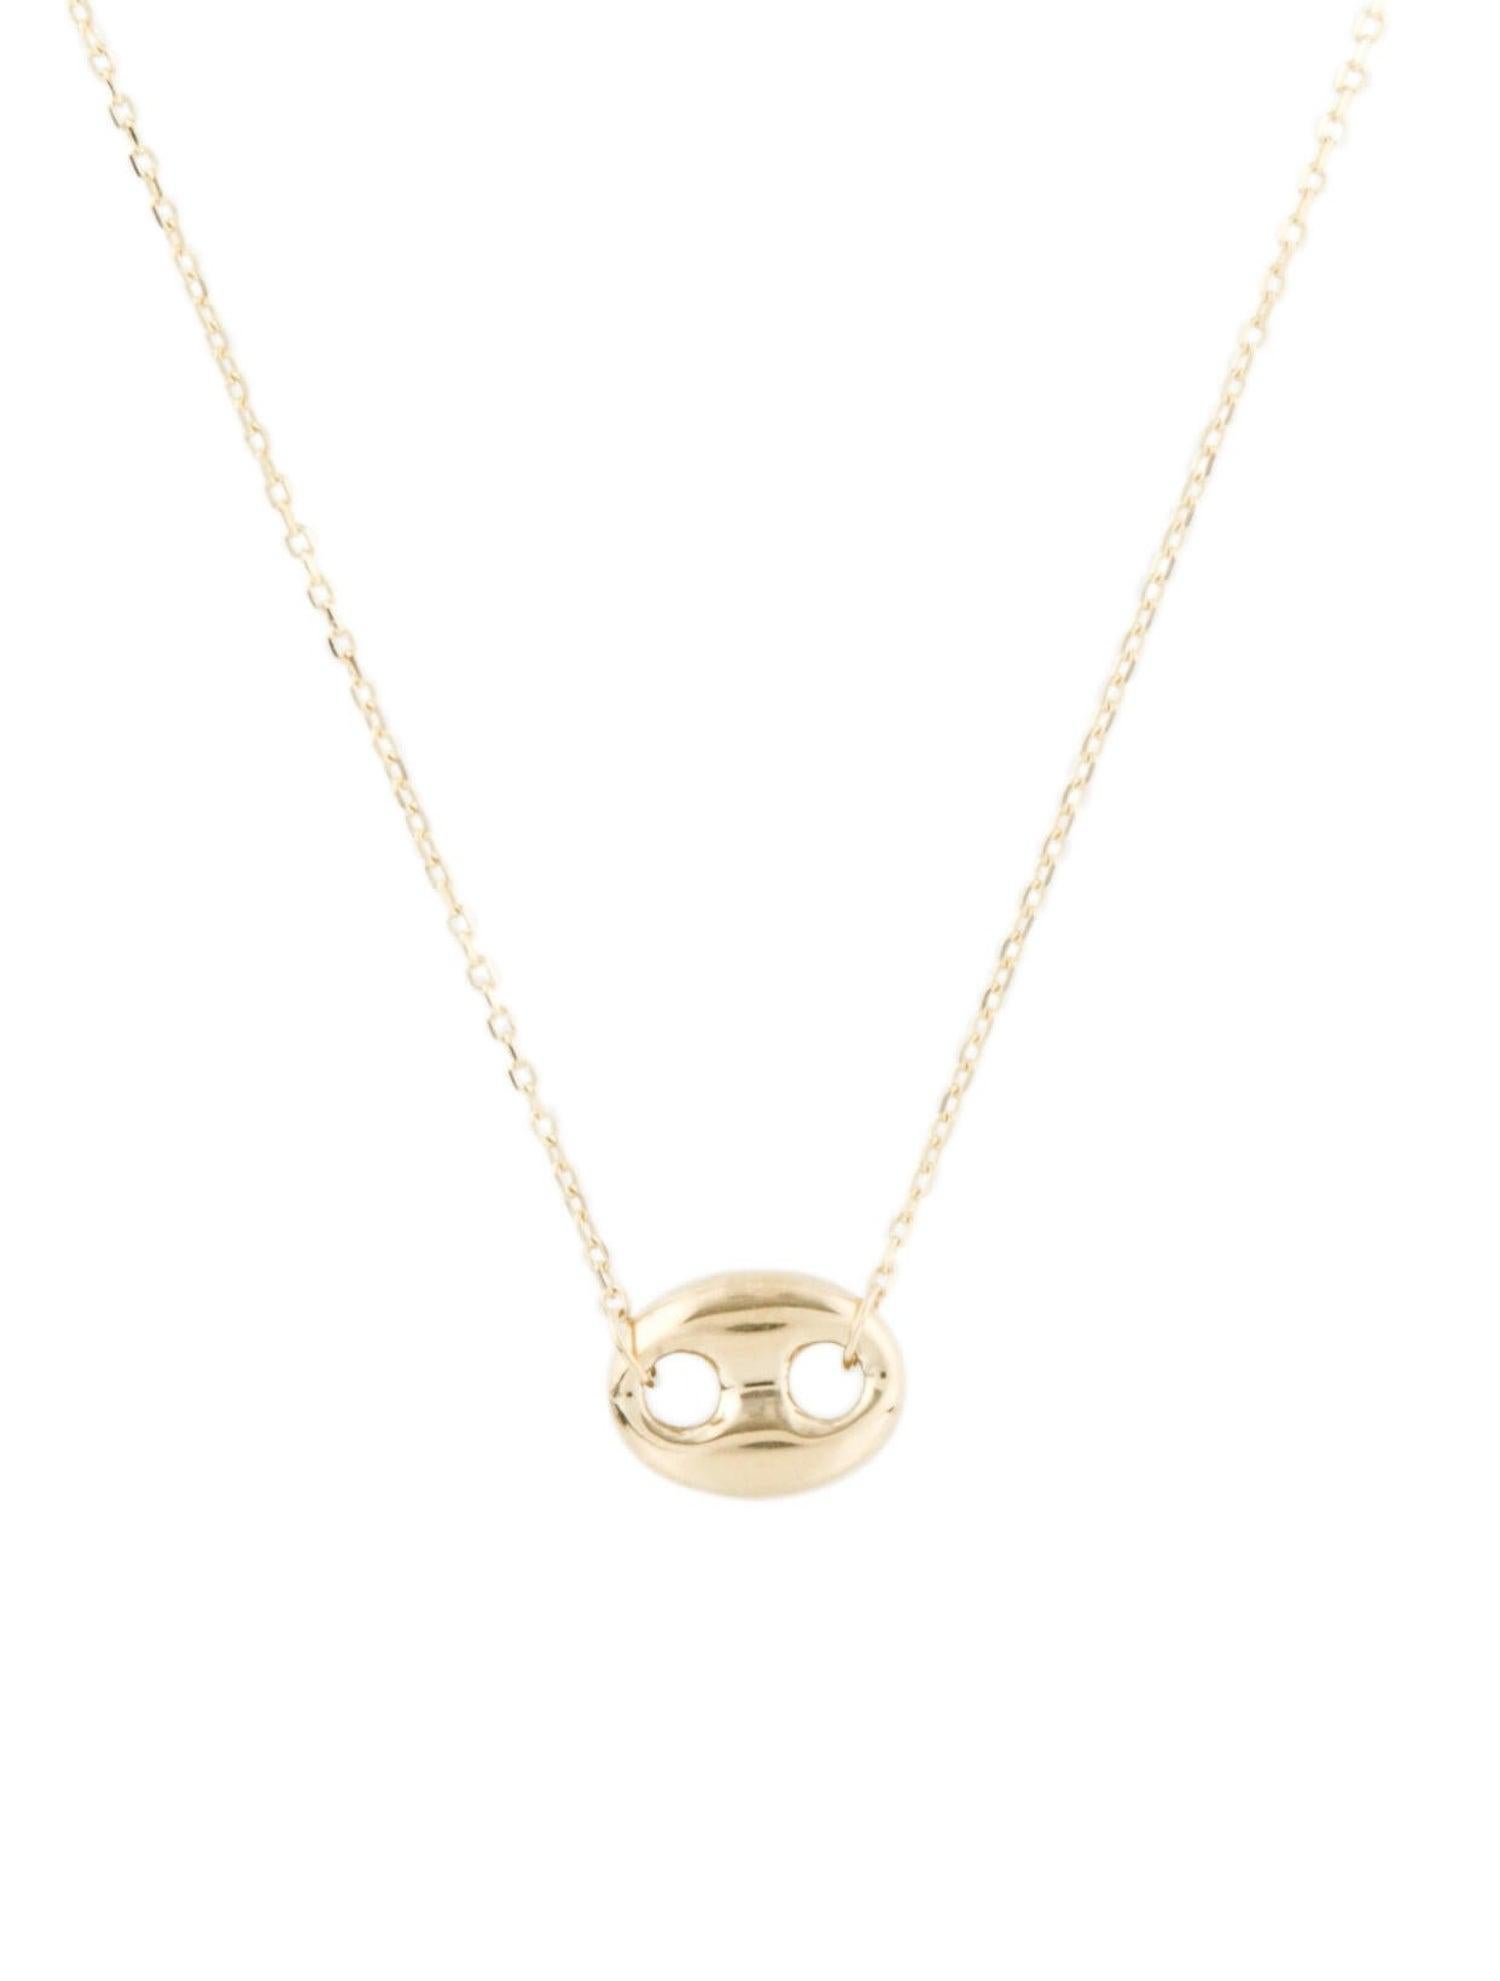 Quality Necklace: Made from real 14k yellow gold.
 Surprise Your Loved Ones with This Necklace: If you are looking to gift your spouse, girlfriend, kid, or mother on a special occasion like Christmas, birthday, engagement or anniversary then look no